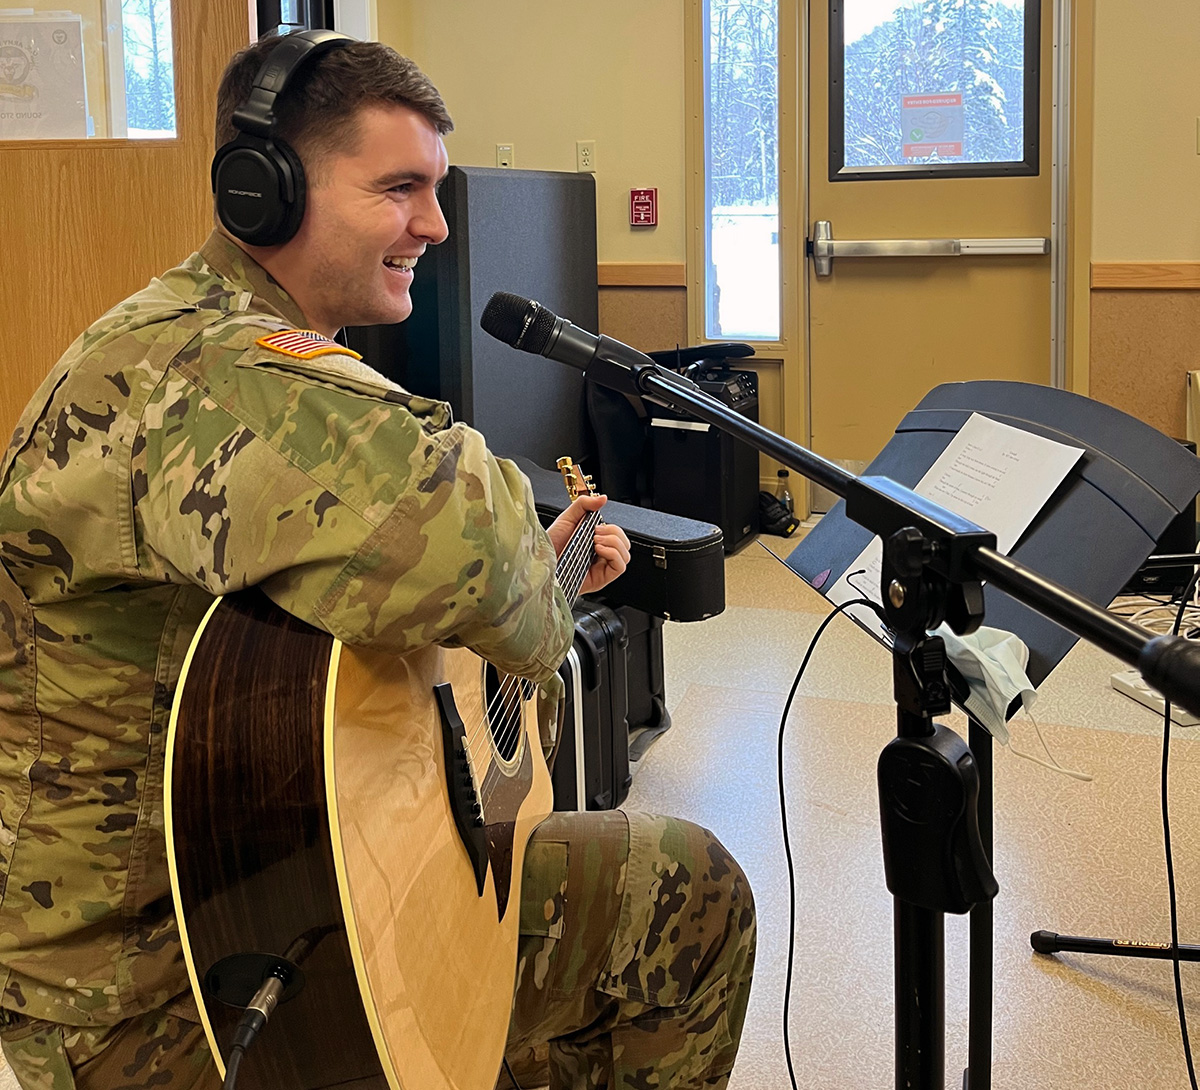 A white man with short dark hair wearing an Army uniform and headphones seated and smiling while holding a guitar. There is a microphone and music stand in front of him.